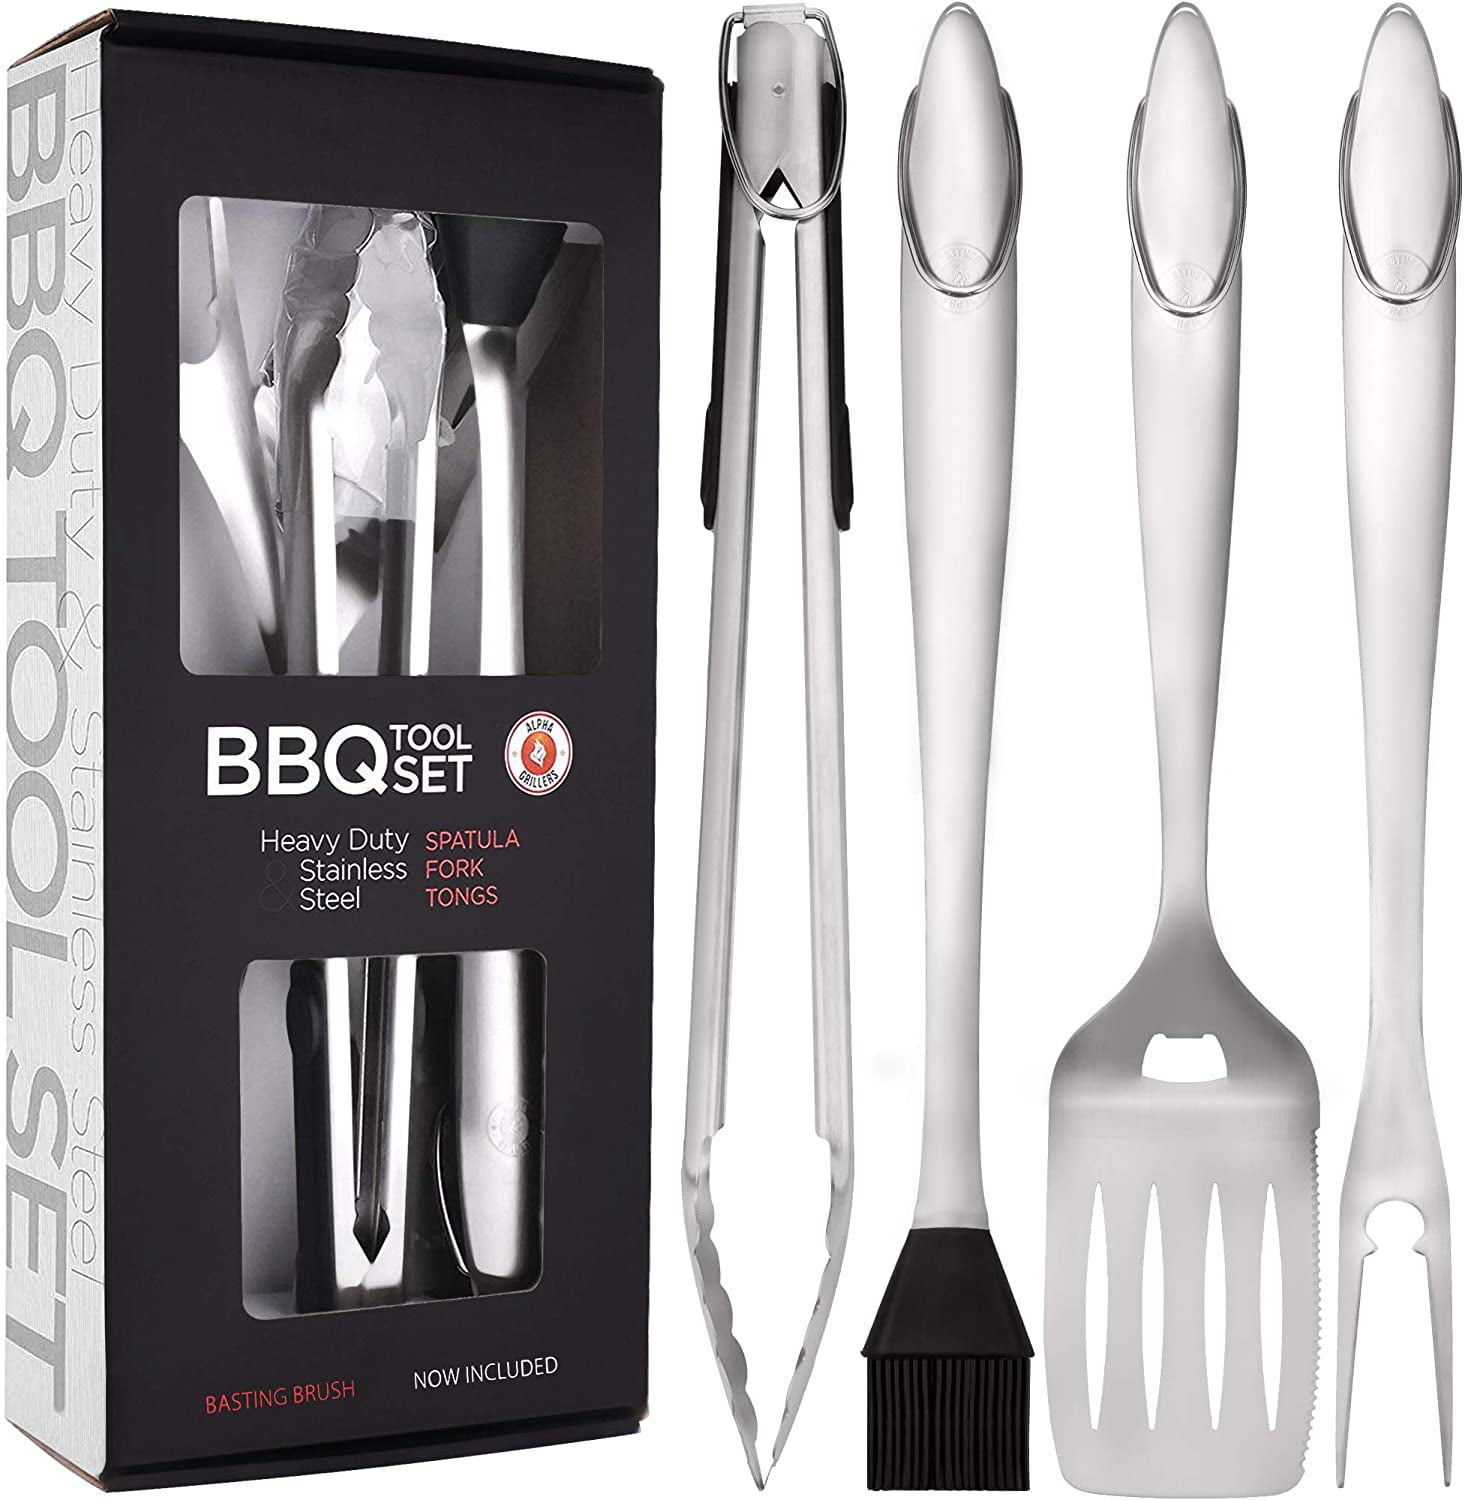 Unique Birthday Gift Idea for Dad Heavy Duty 20% Thicker Stainless Steel Professional Grade Barbecue Accessories BBQ Grilling Tools Set 3 Piece Utensils Kit Includes Spatula Tongs & Fork 